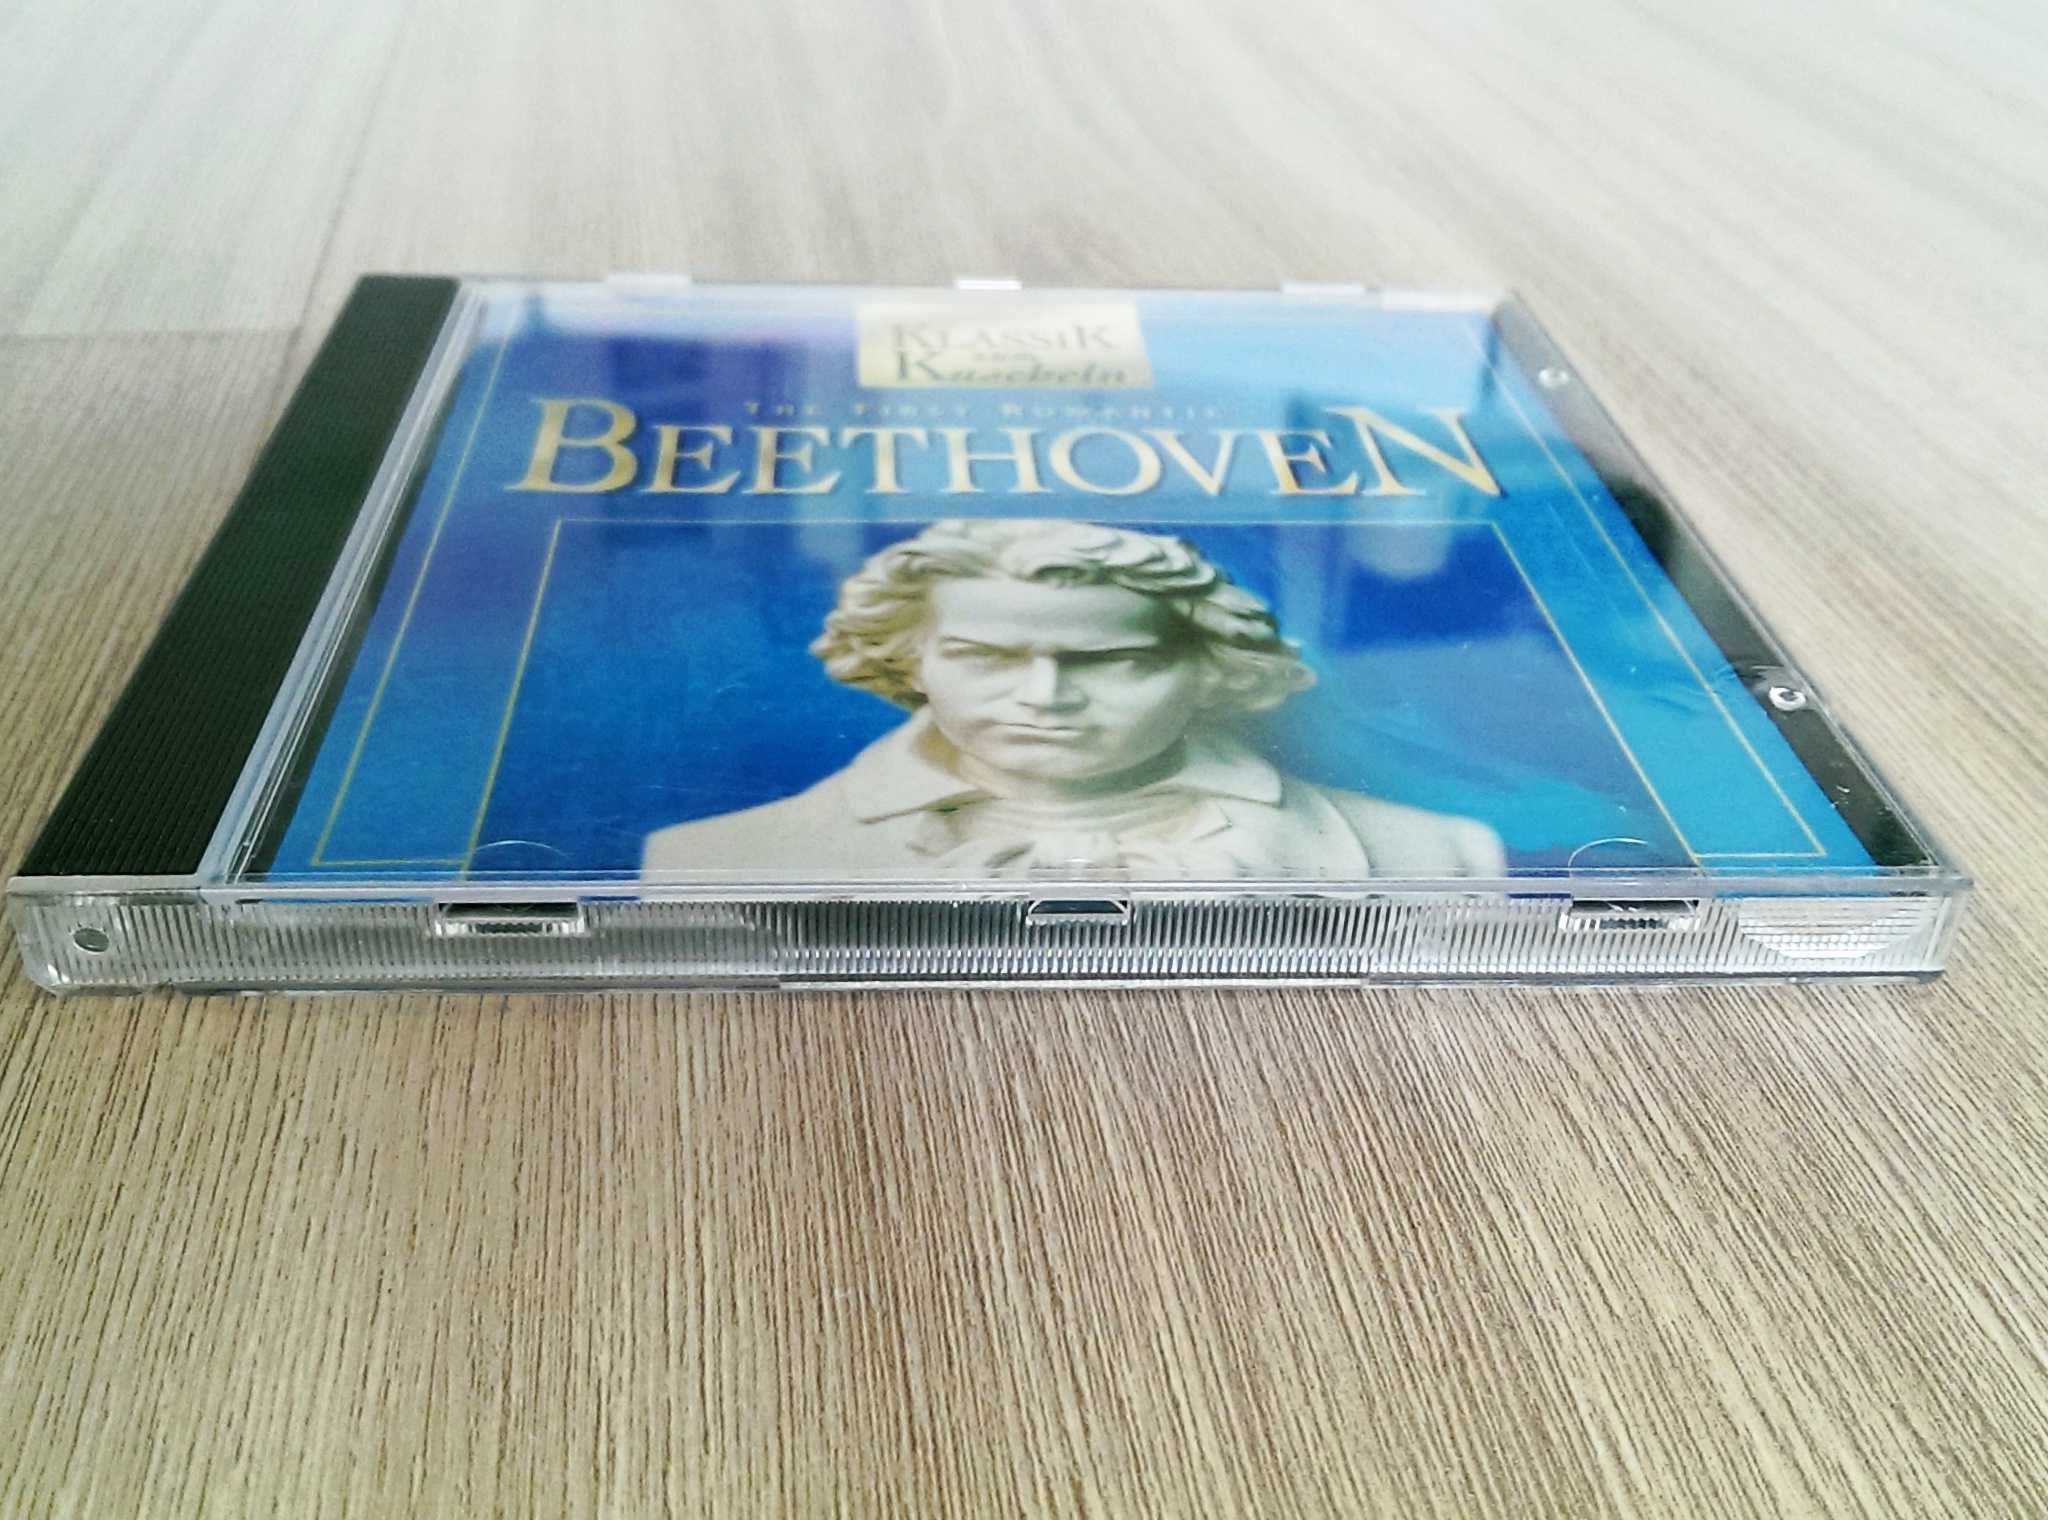 The first Romantic - Beethoven CD